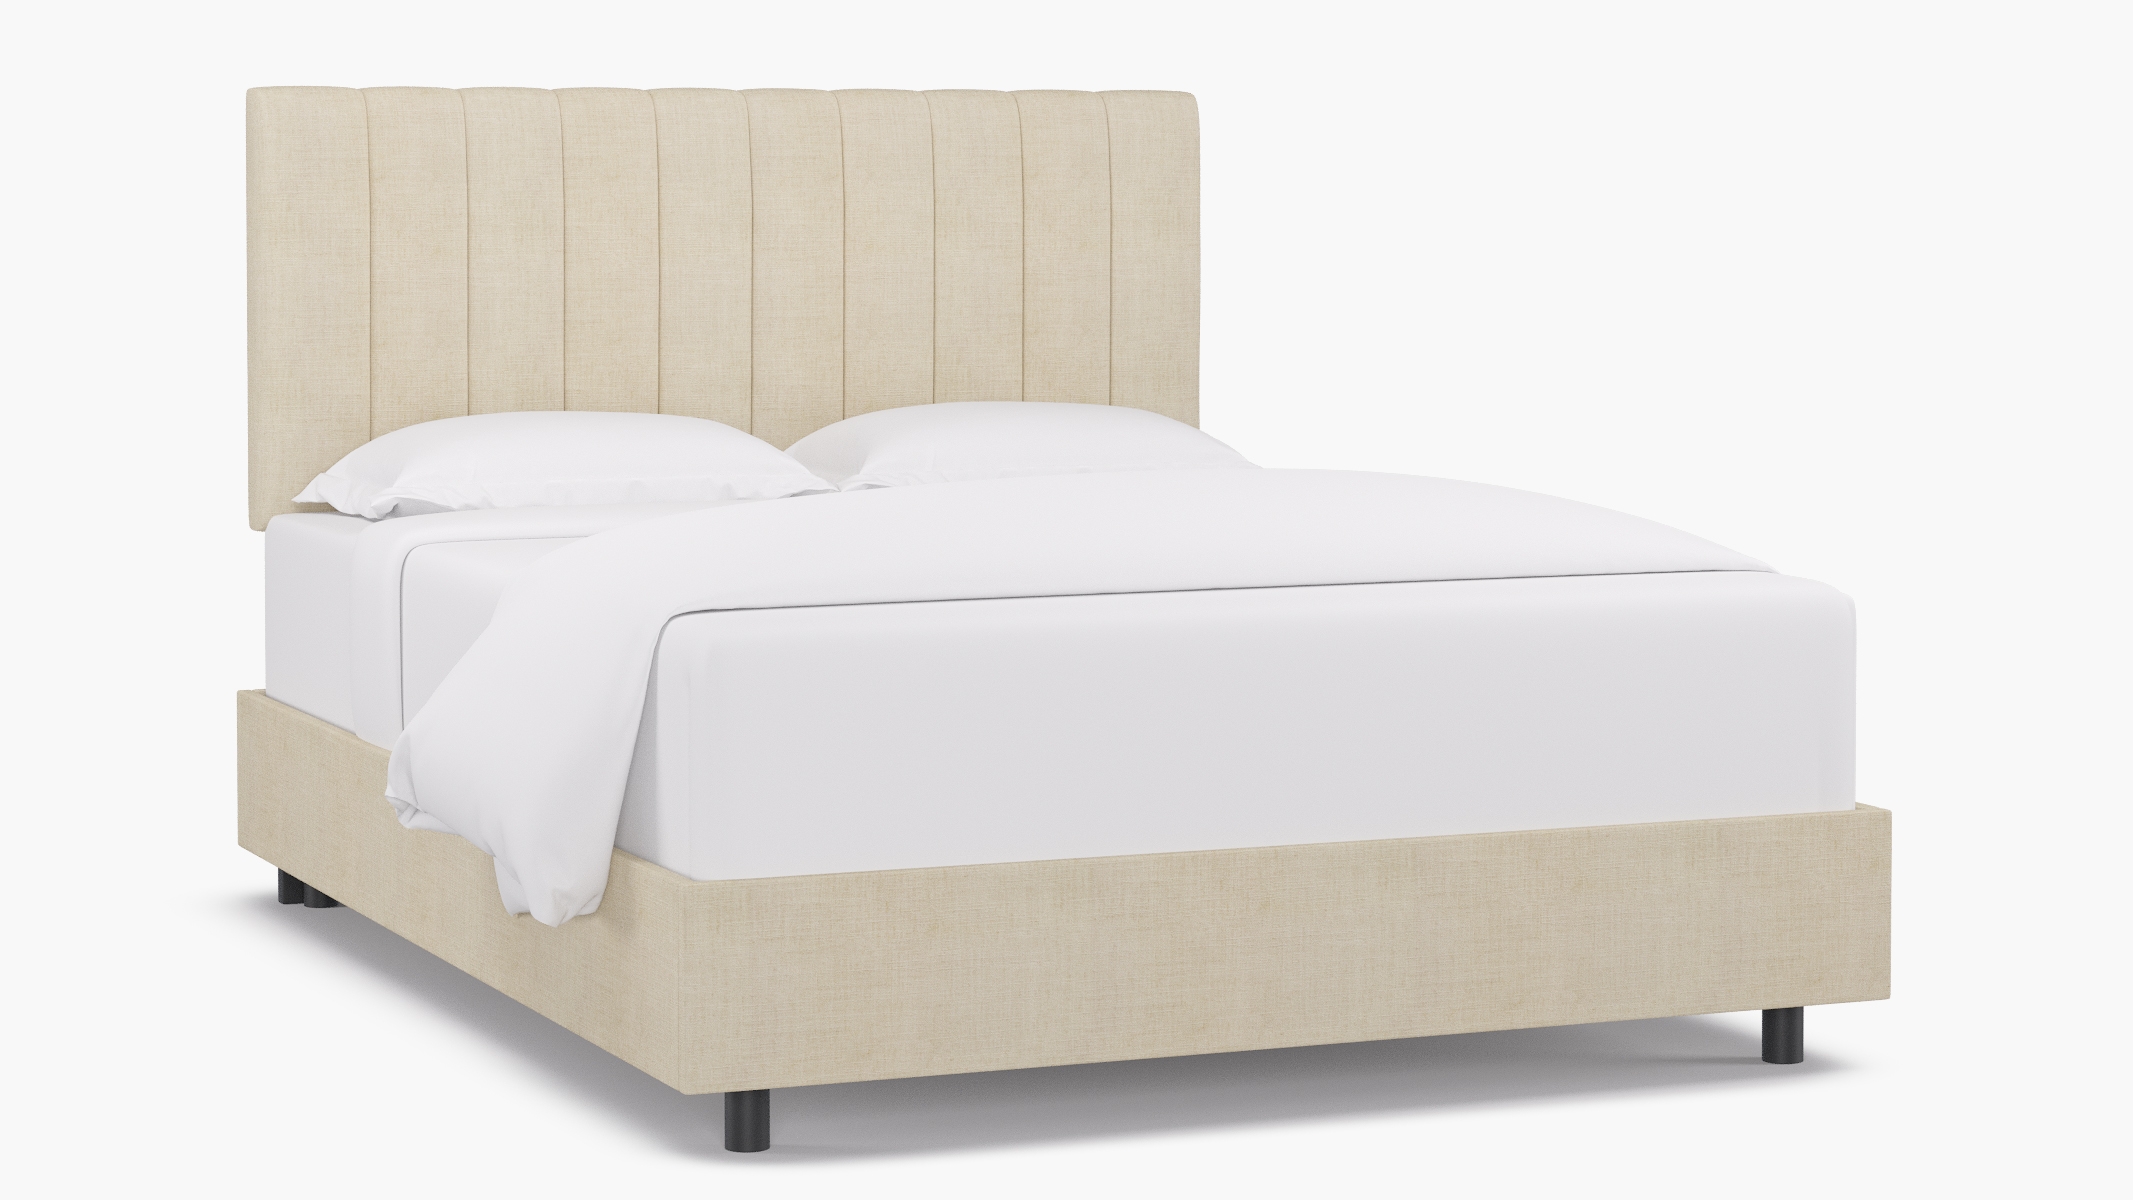 Channel Tufted Bed, Talc Everyday Linen, Queen - Image 1